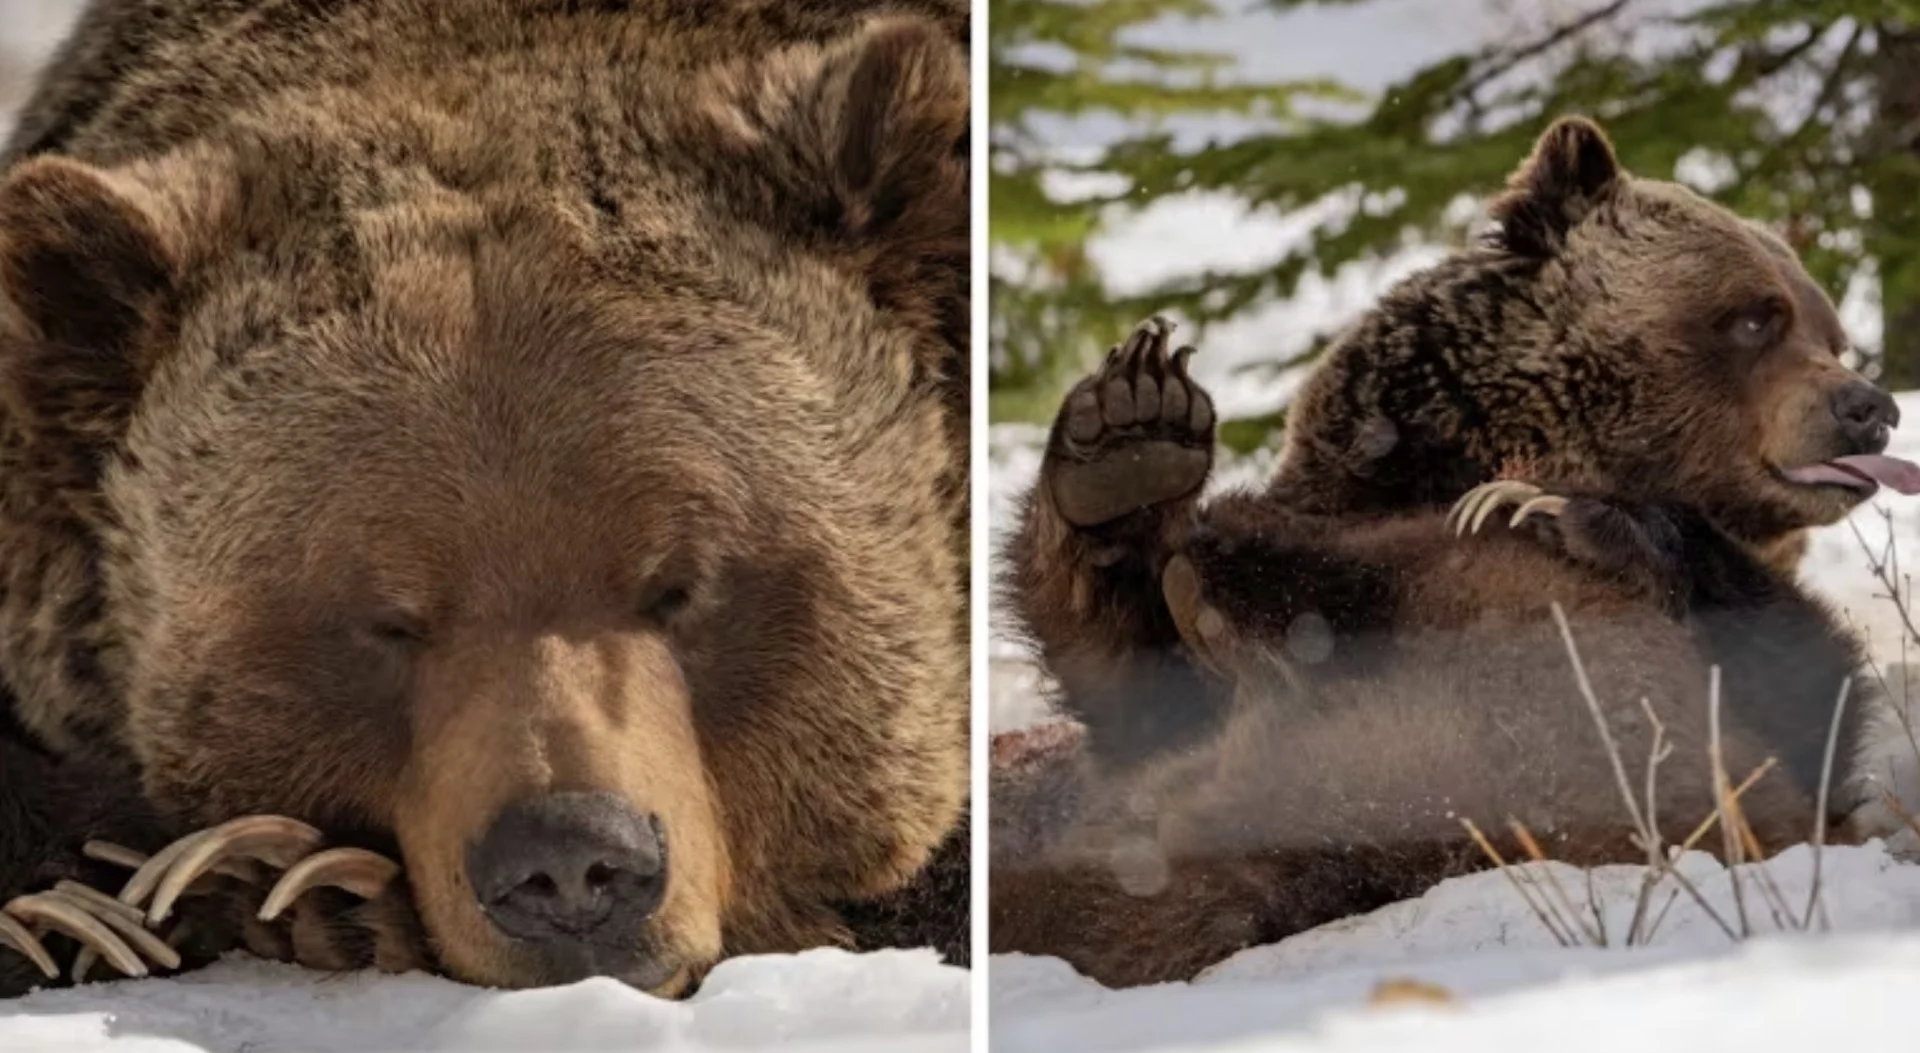 Grizzlies get their bearings after emerging from winter slumber